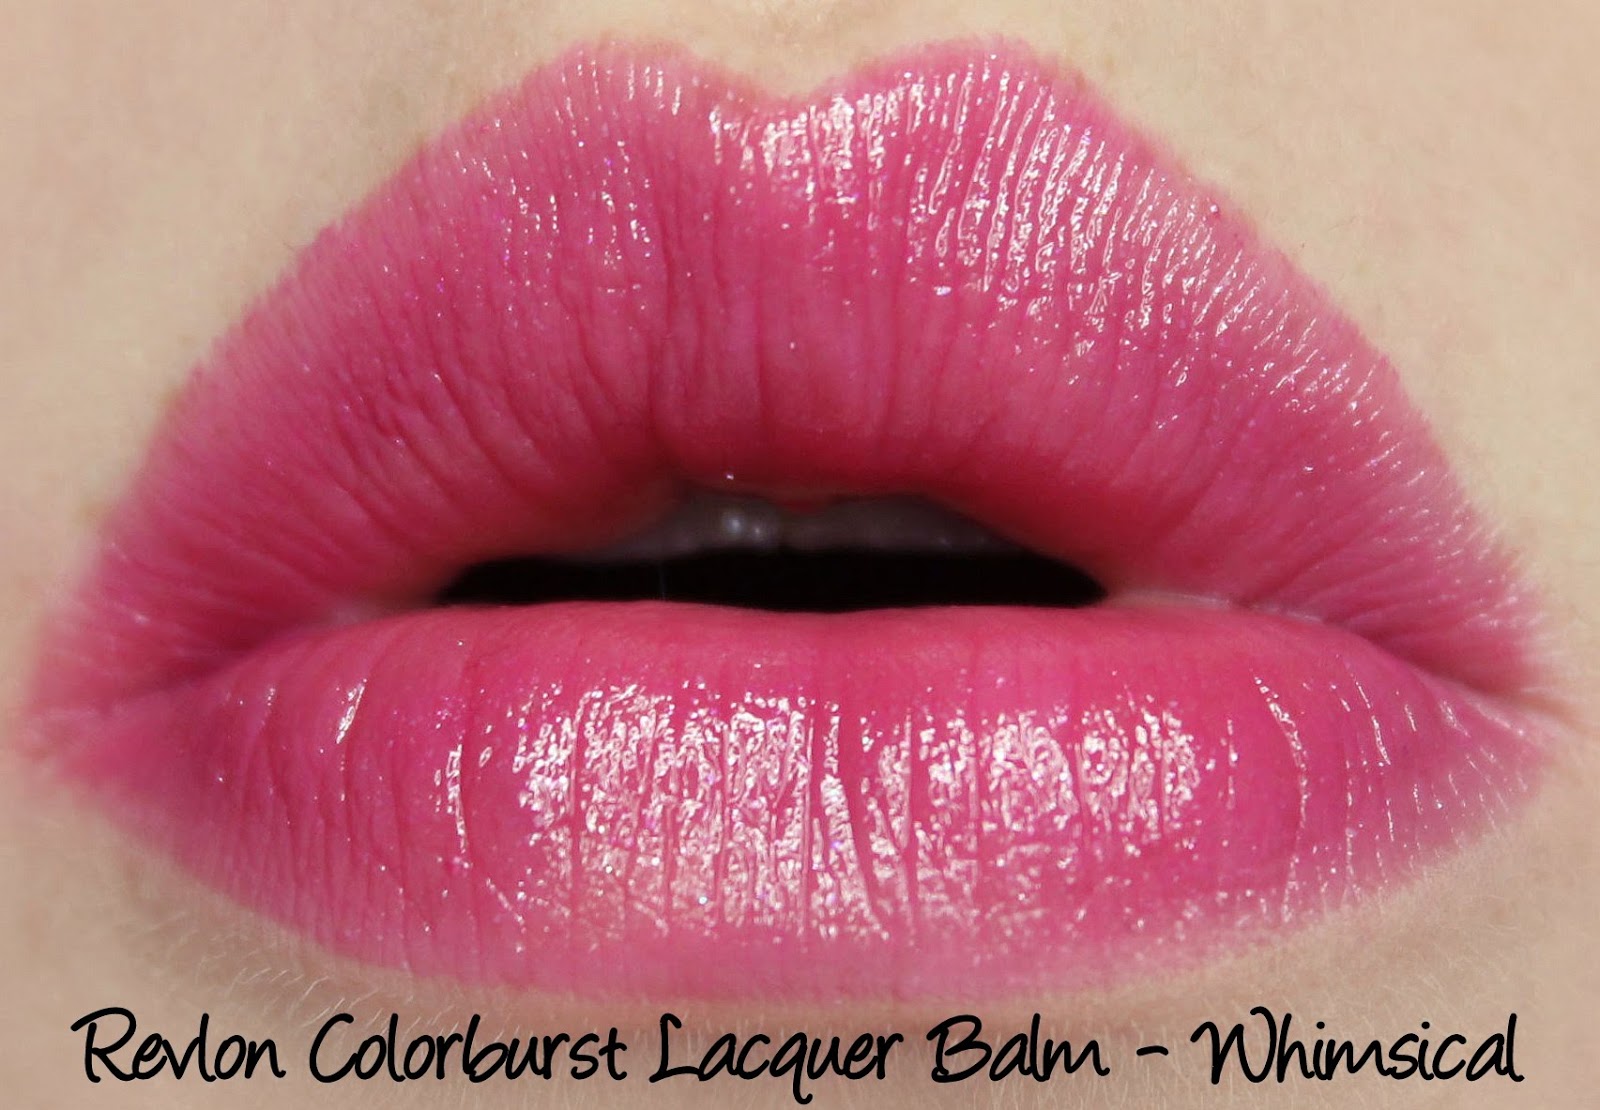 Revlon Colorburst Lacquer Balm - Whimsical Swatches & Review